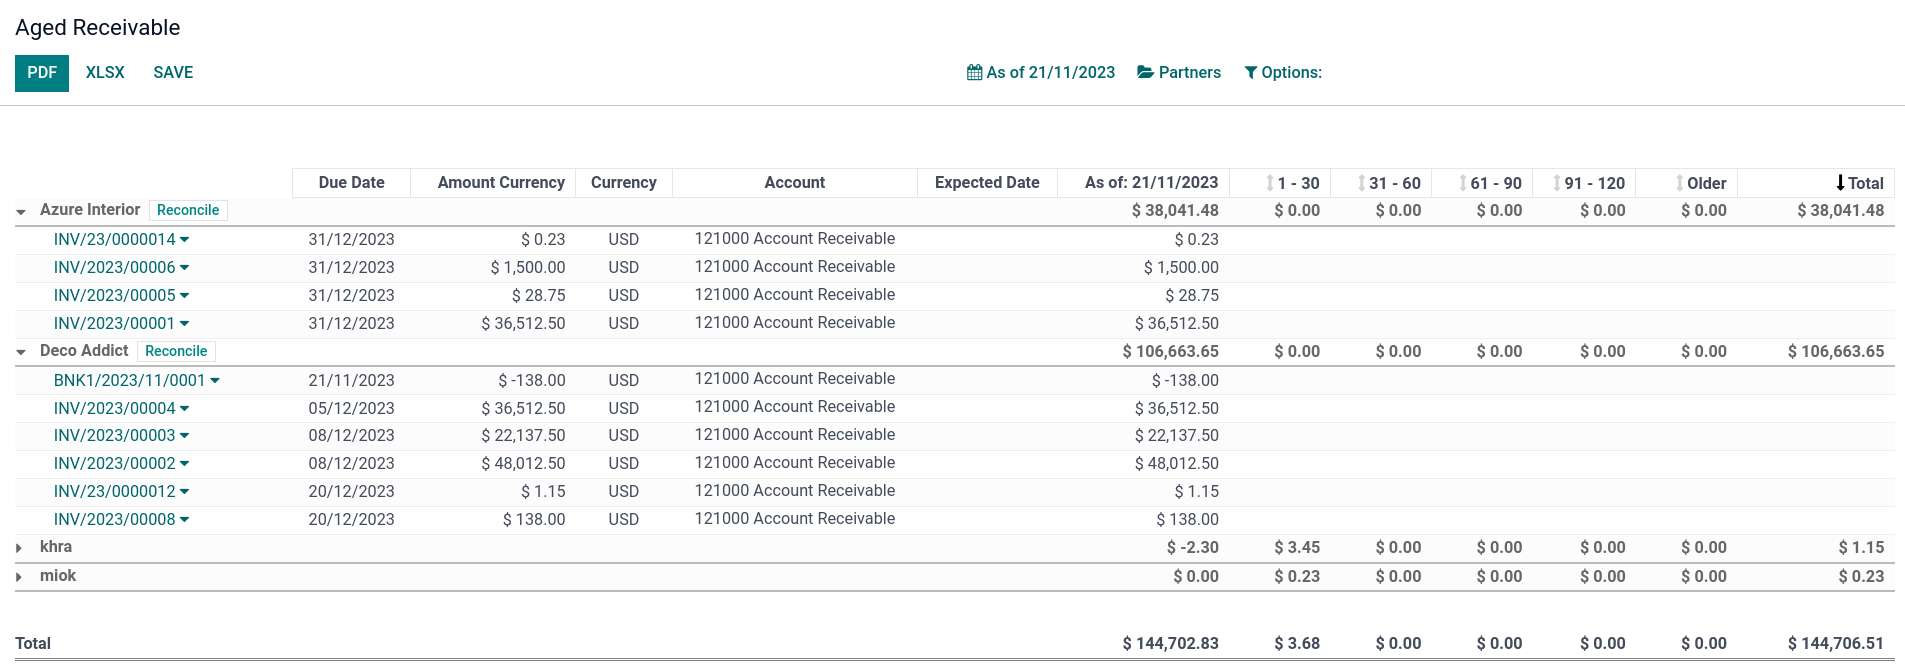 Aged Receivable report in Odoo.